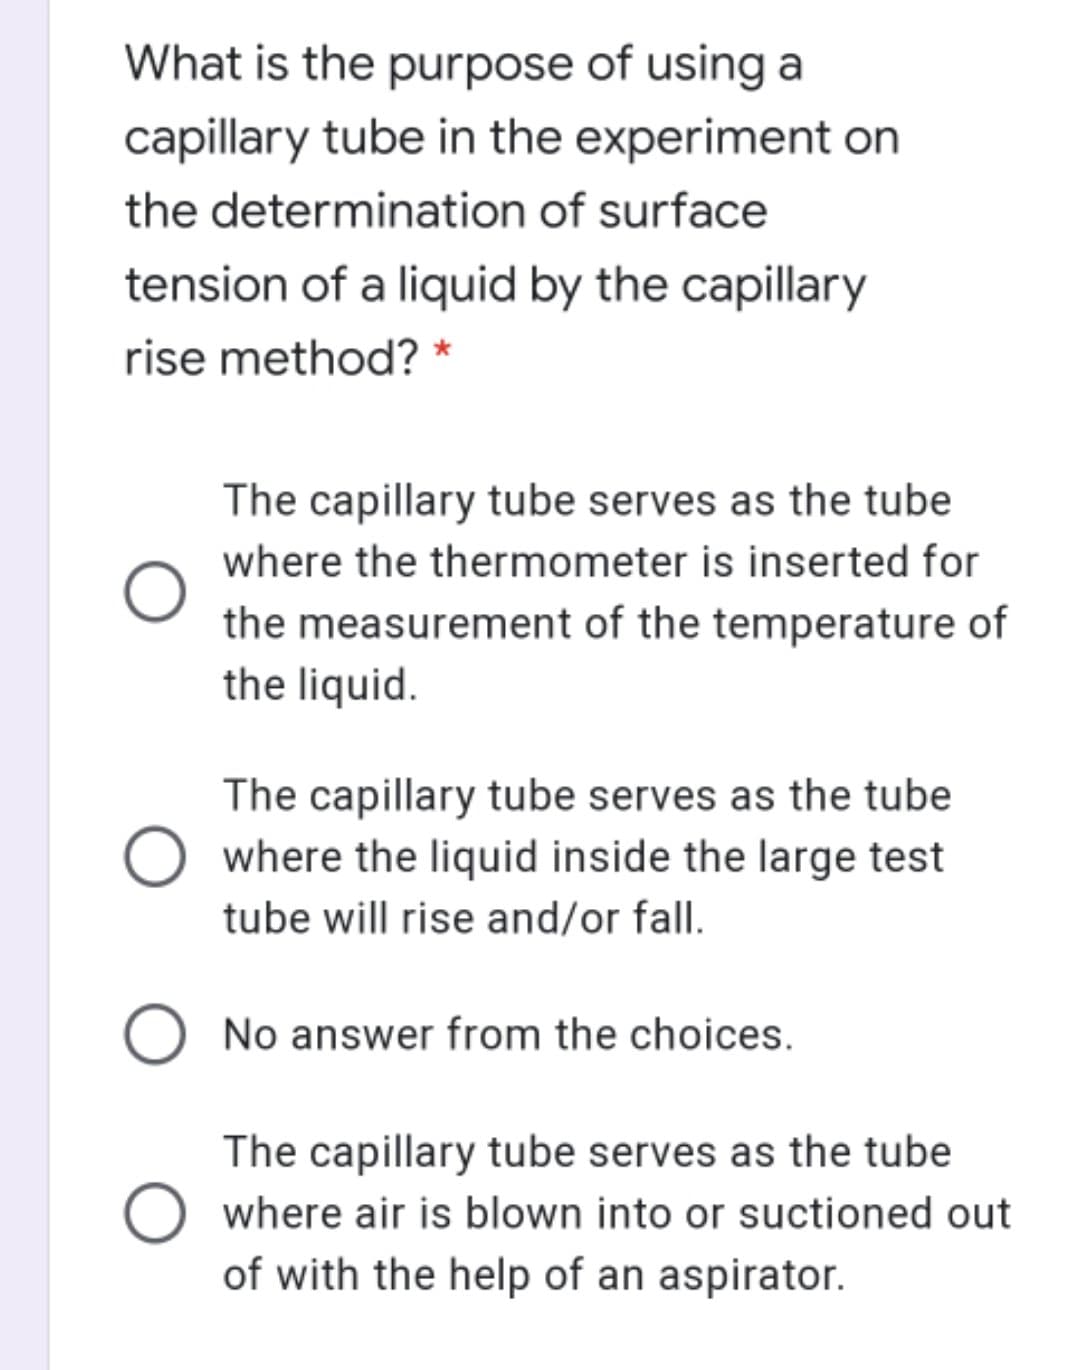 What is the purpose of using a
capillary tube in the experiment on
the determination of surface
tension of a liquid by the capillary
rise method? *
The capillary tube serves as the tube
where the thermometer is inserted for
the measurement of the temperature of
the liquid.
The capillary tube serves as the tube
where the liquid inside the large test
tube will rise and/or fall.
No answer from the choices.
The capillary tube serves as the tube
where air is blown into or suctioned out
of with the help of an aspirator.
